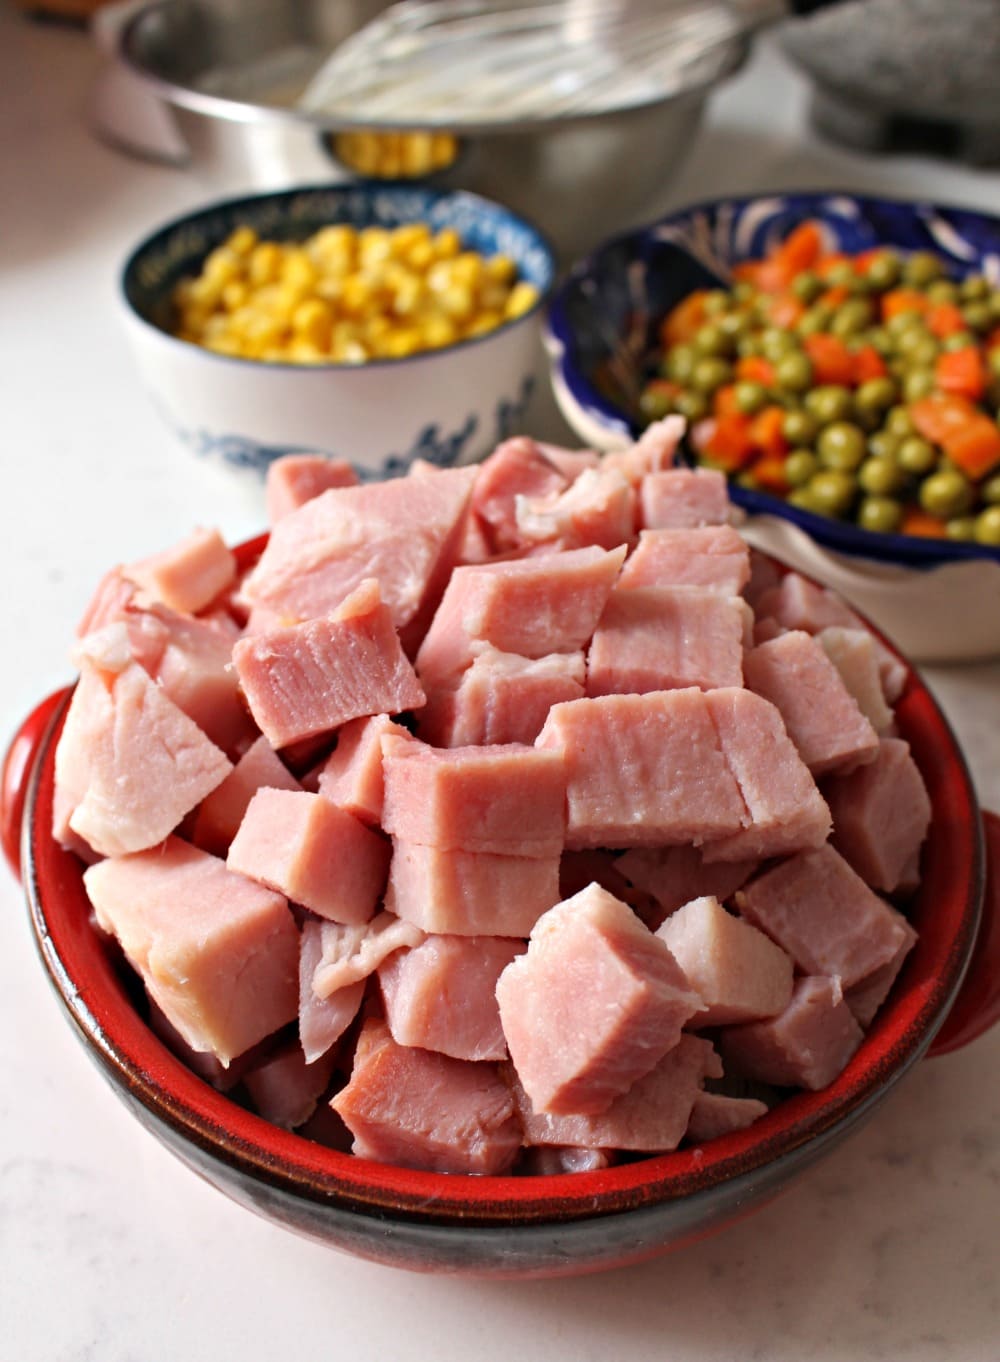 Cubed ham in a red bowl next to the other ingredients for Mexican pasta salad.